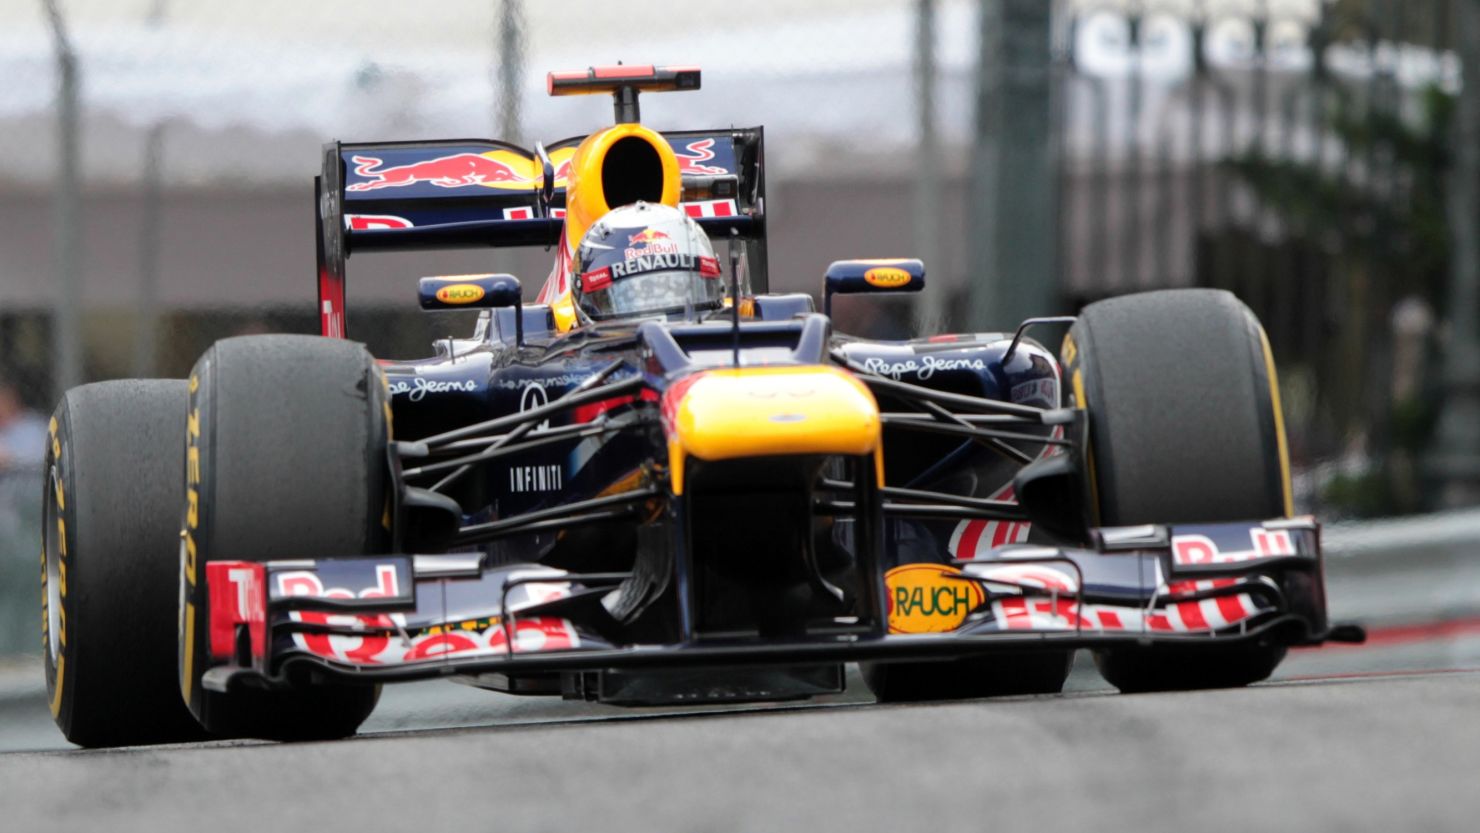 Red Bull's RB8 car has taken the checkered flag in two of this year's six F1 races.